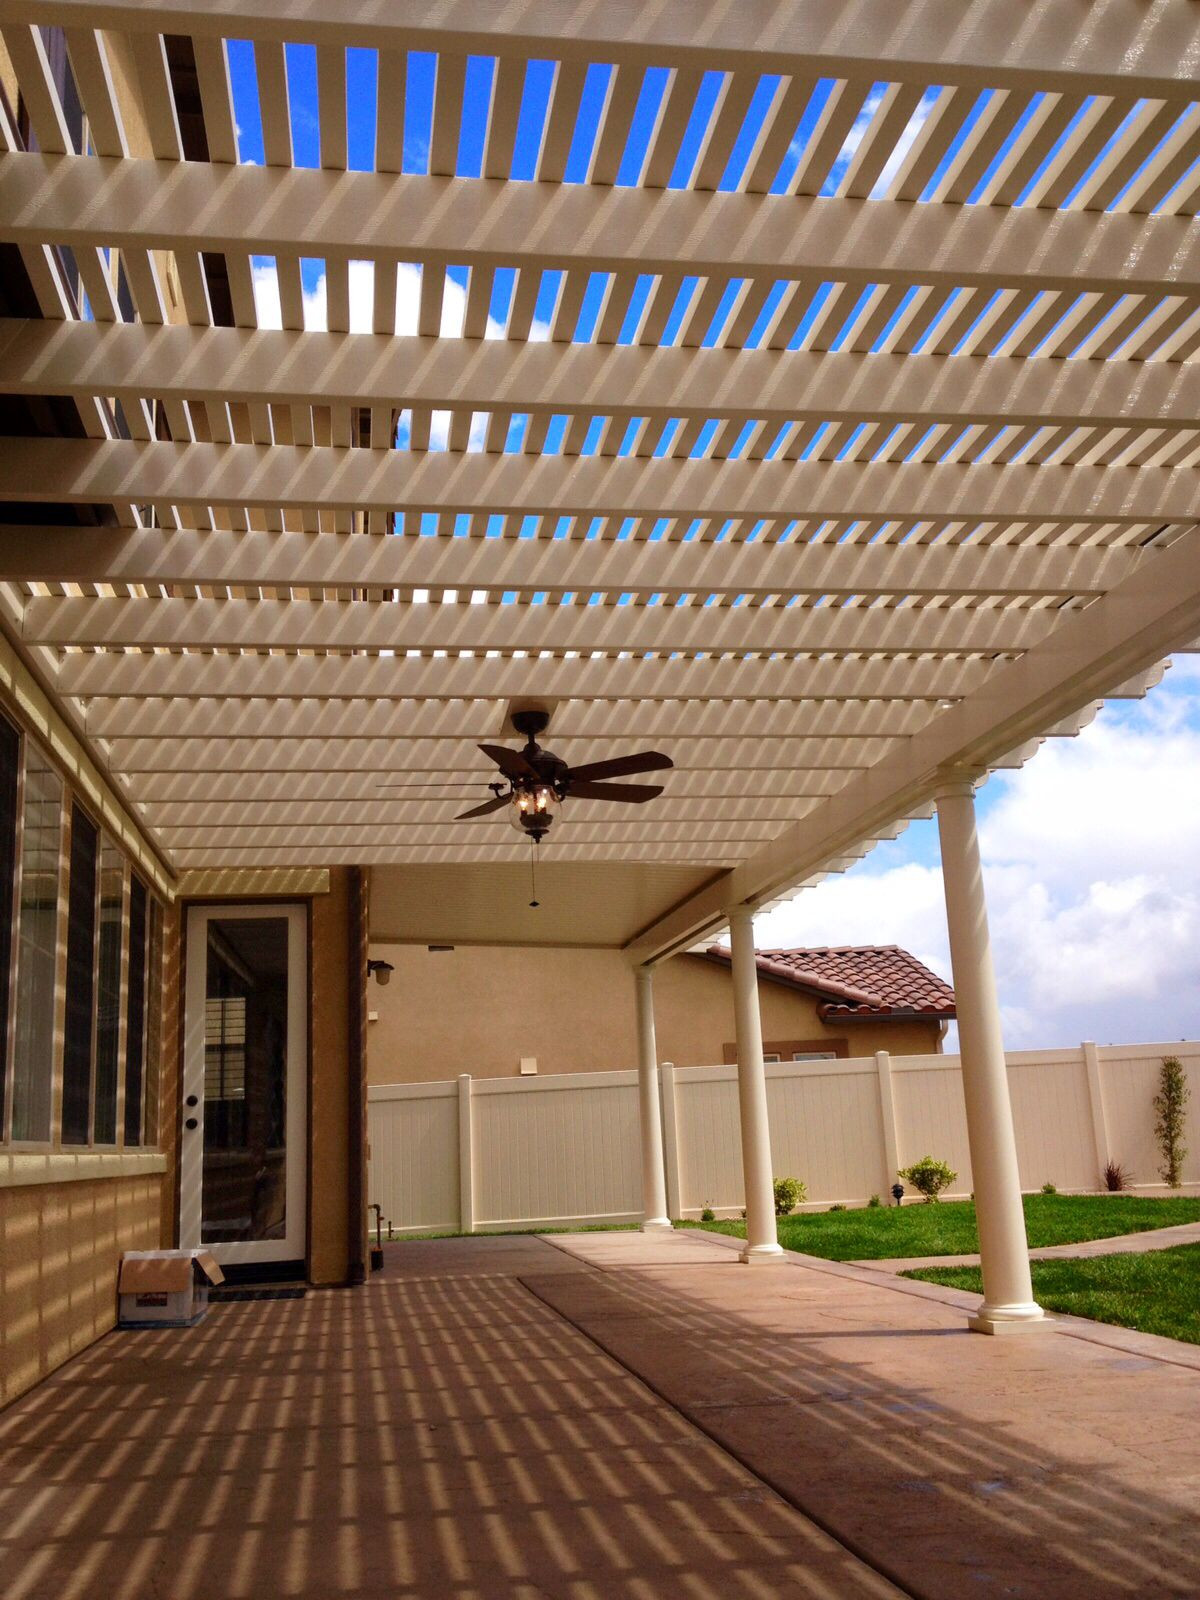 DIY Outdoor Covered Patio
 Diy alumawood patio covers Contact us and let us help